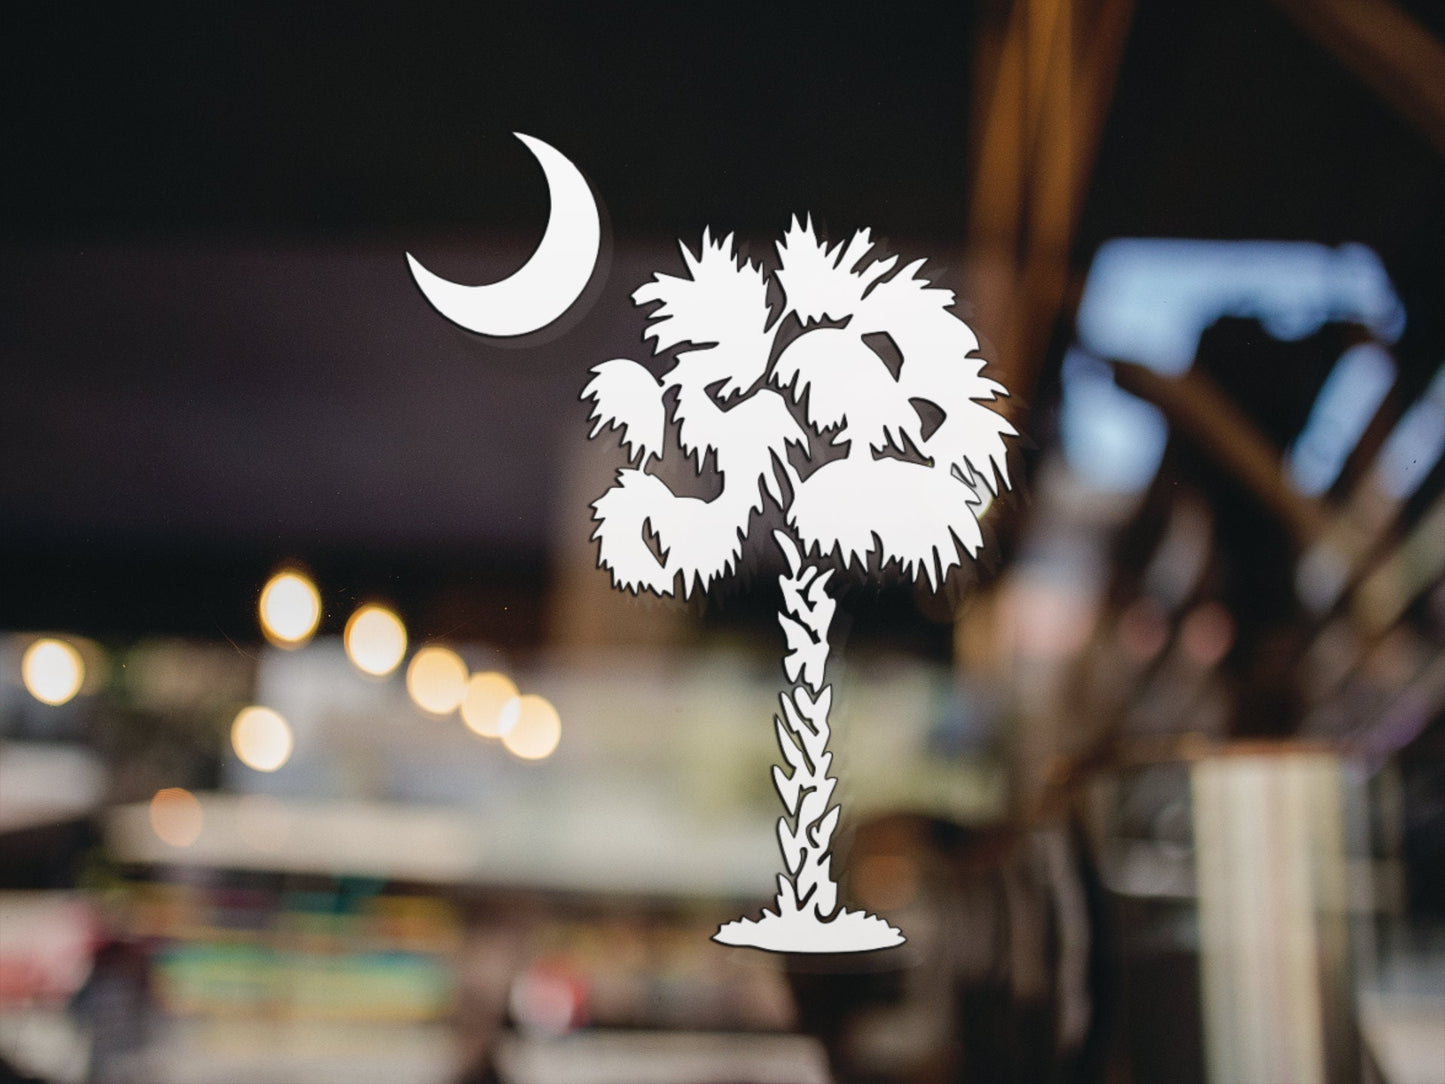 SC State Palm Tree Moon Decal - Many Colors & Sizes